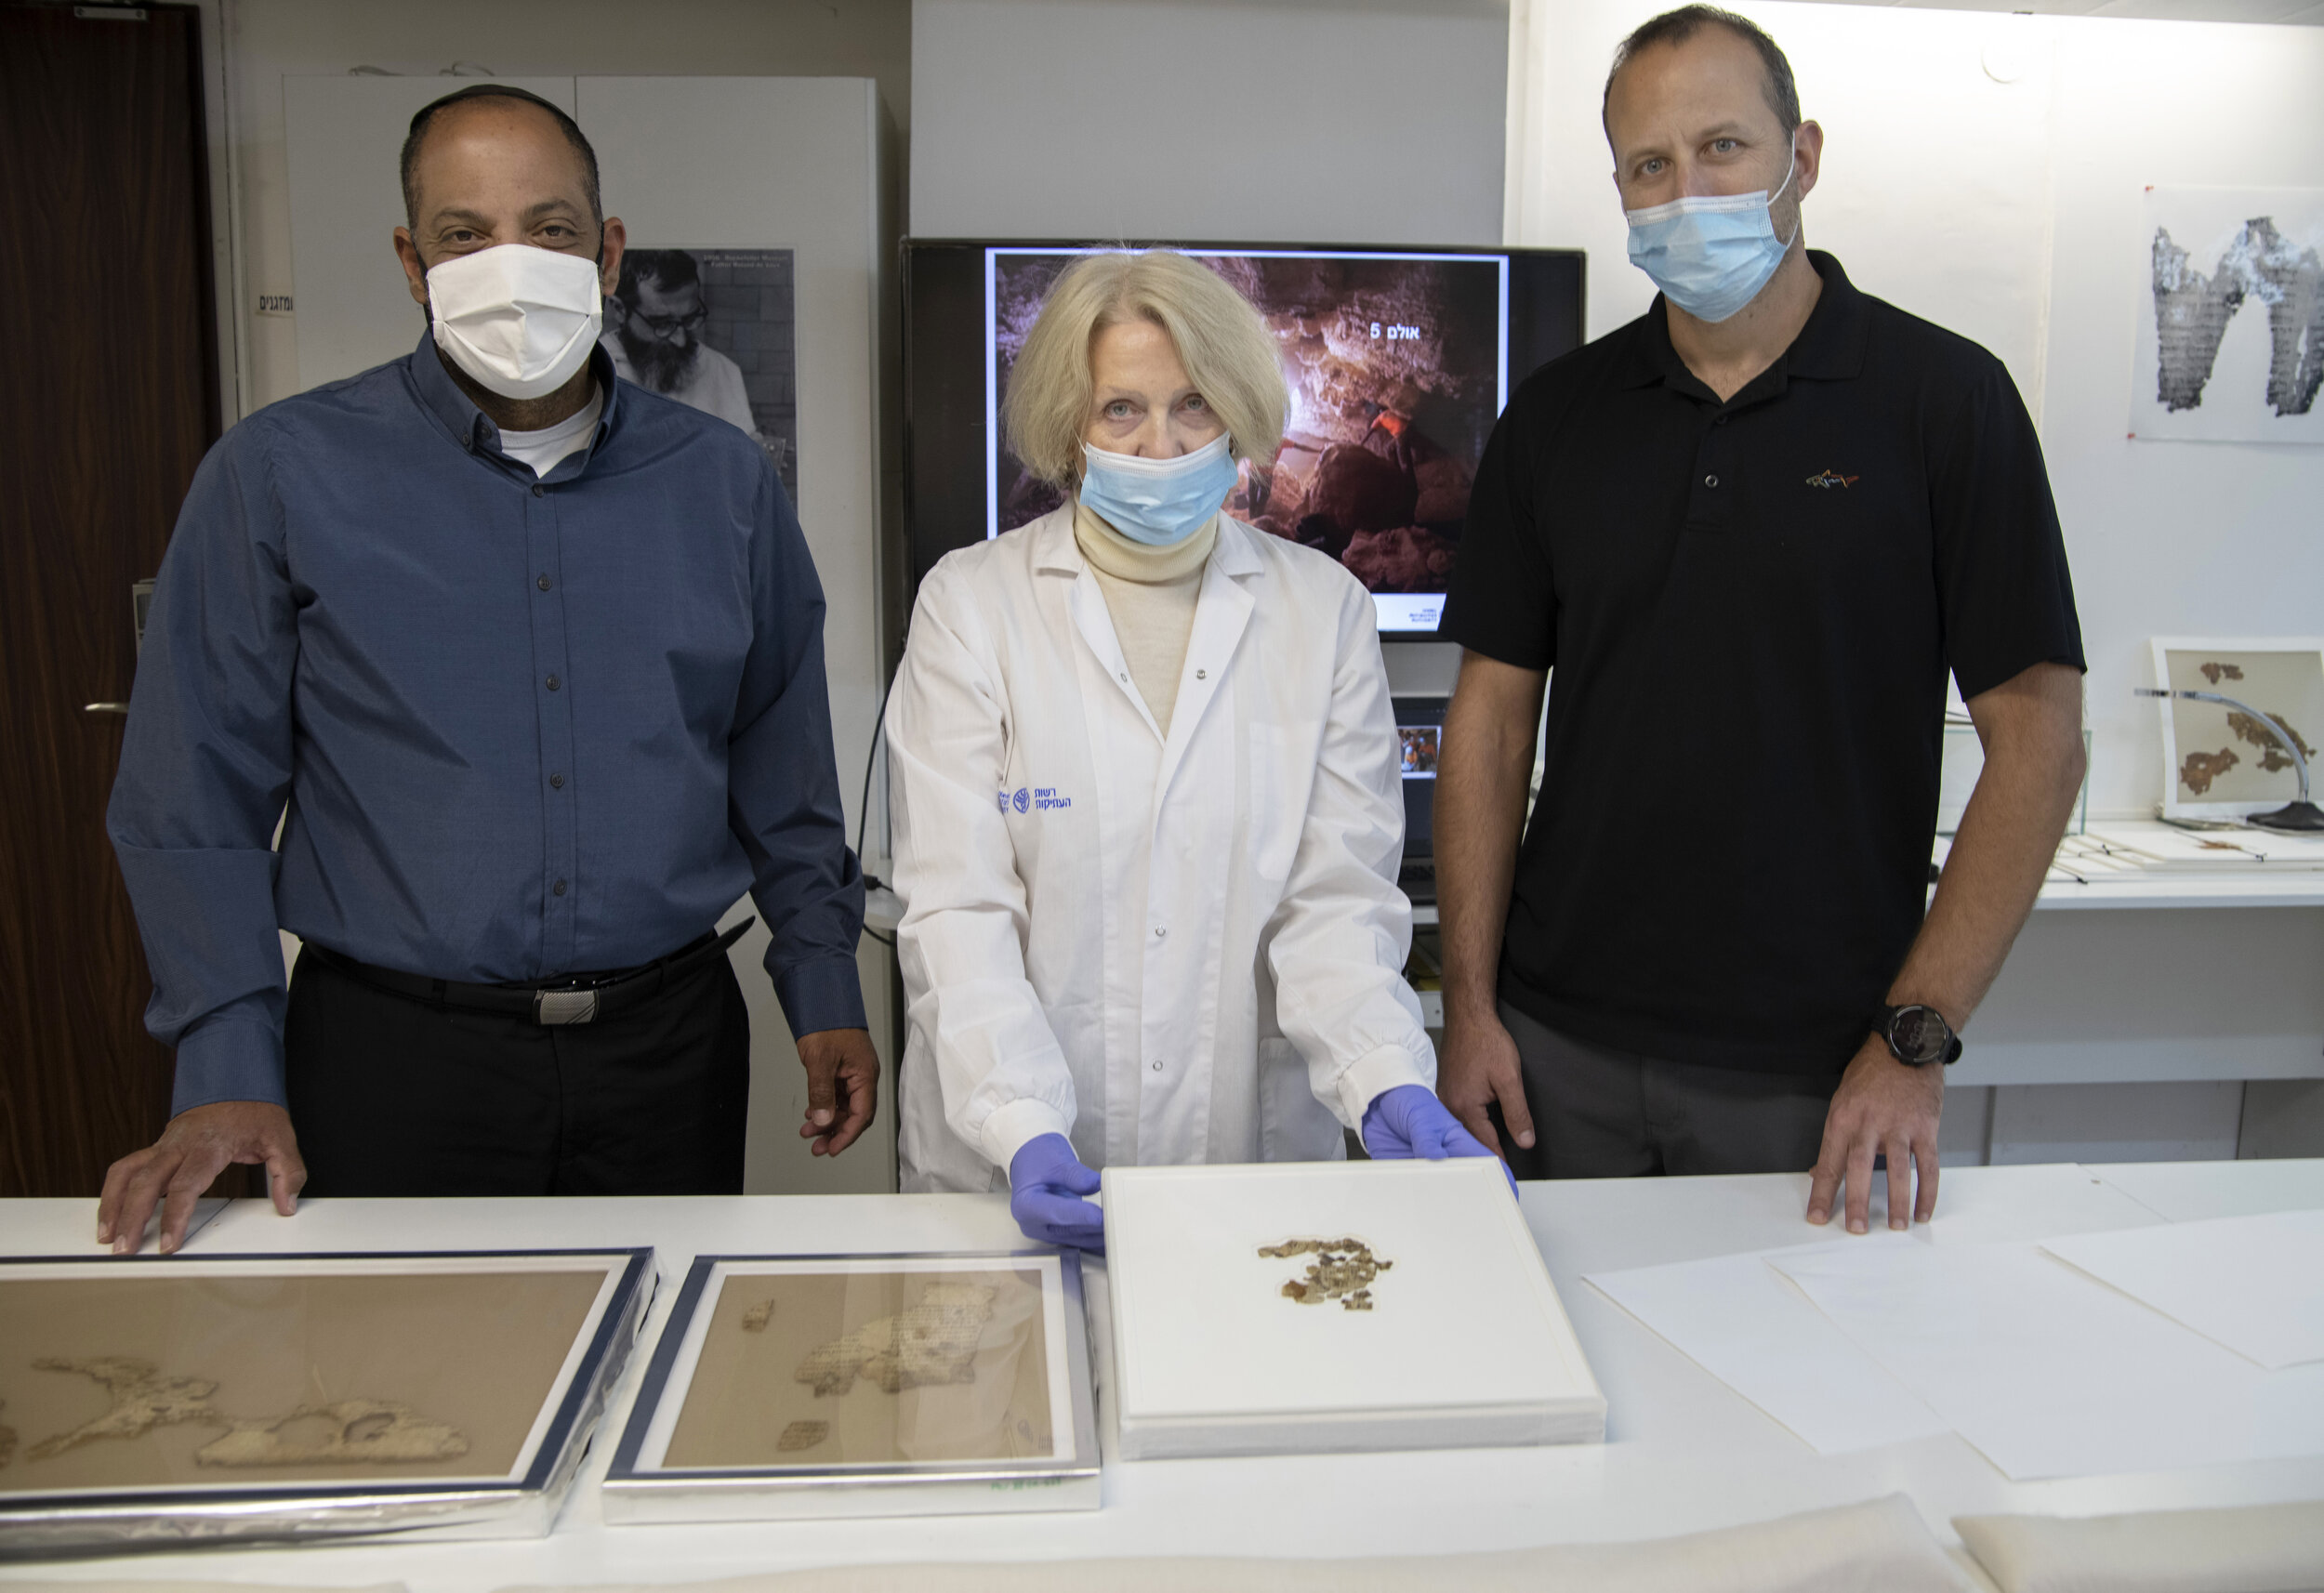 3From Right to Left-Raz Frohlich-Tanya Bitler- Avi Cohen-Photo-Shai Halevi Israel Antiquities Authority.jpg